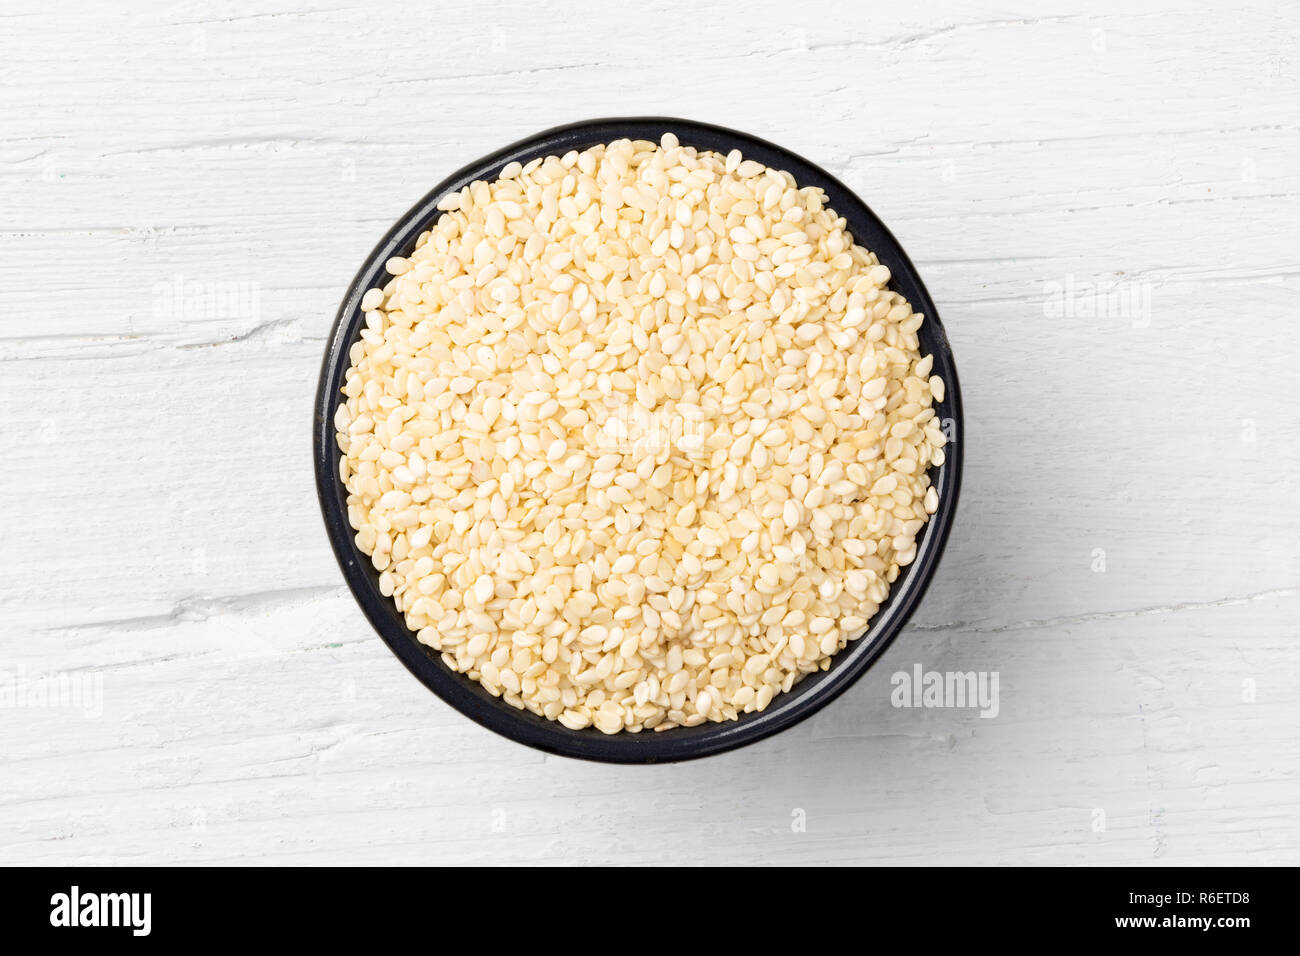 Sesame seeds in iron cast mug on white wooden background, view directly from above Stock Photo